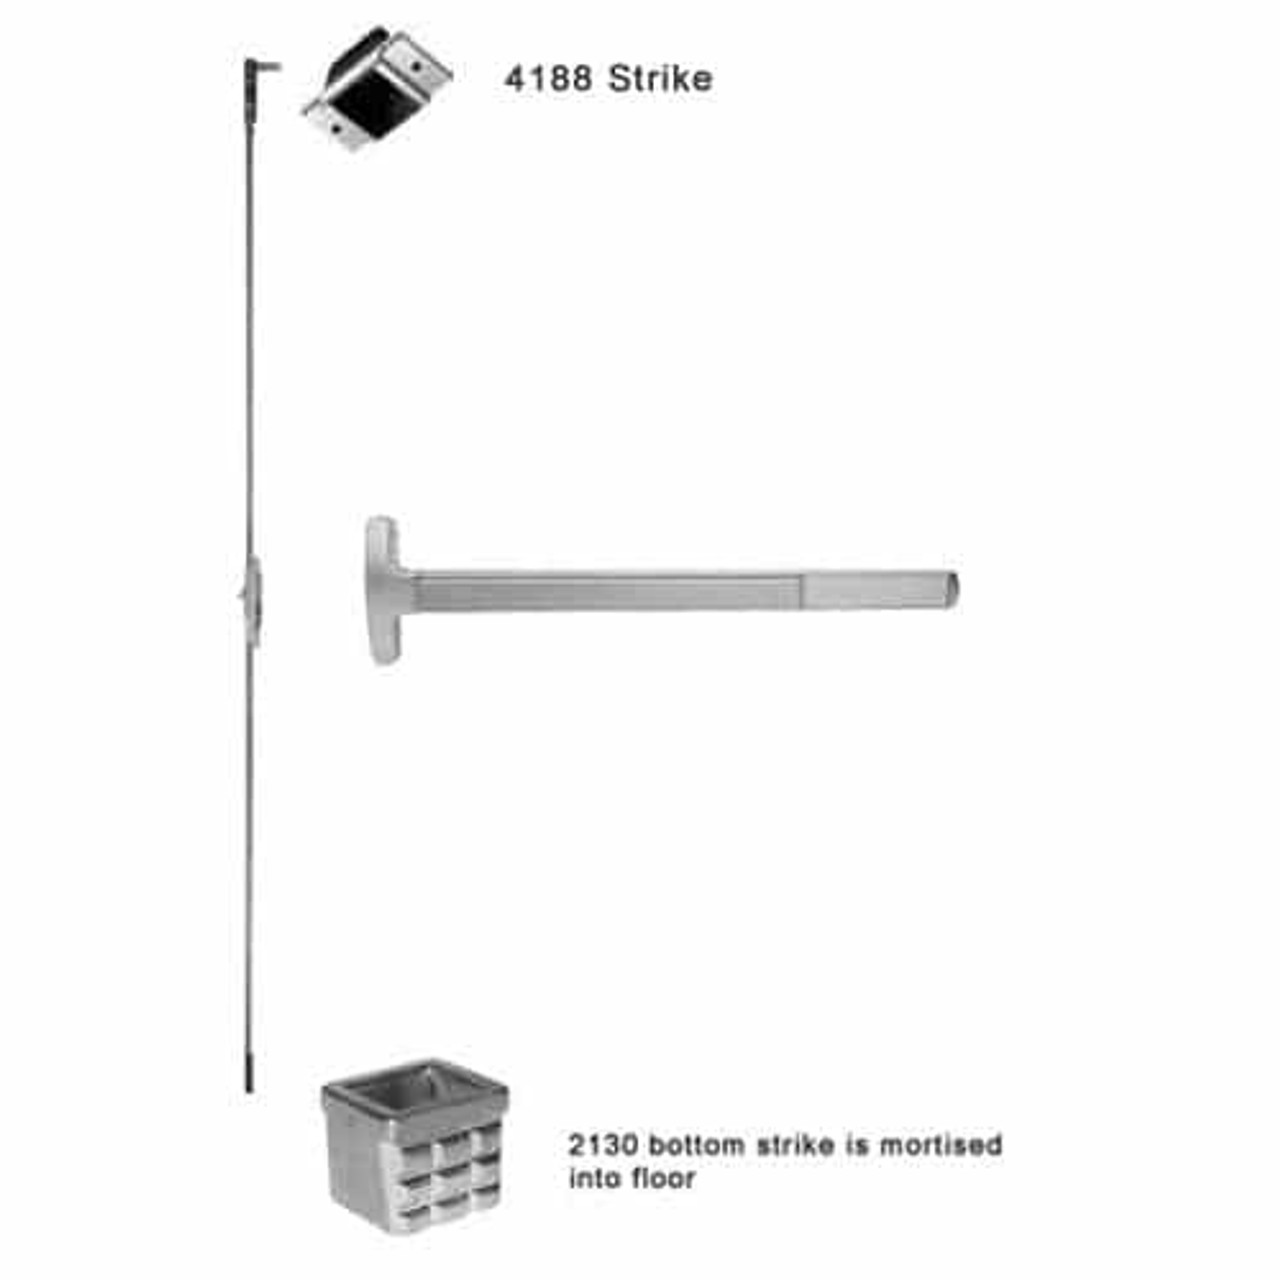 F-24-C-L-DT-DANE-US32-4-RHR Falcon 24 Series Fire Rated Concealed Vertical Rod Device 712L-DT Dane Lever with Dummy Trim in Polished Stainless Steel